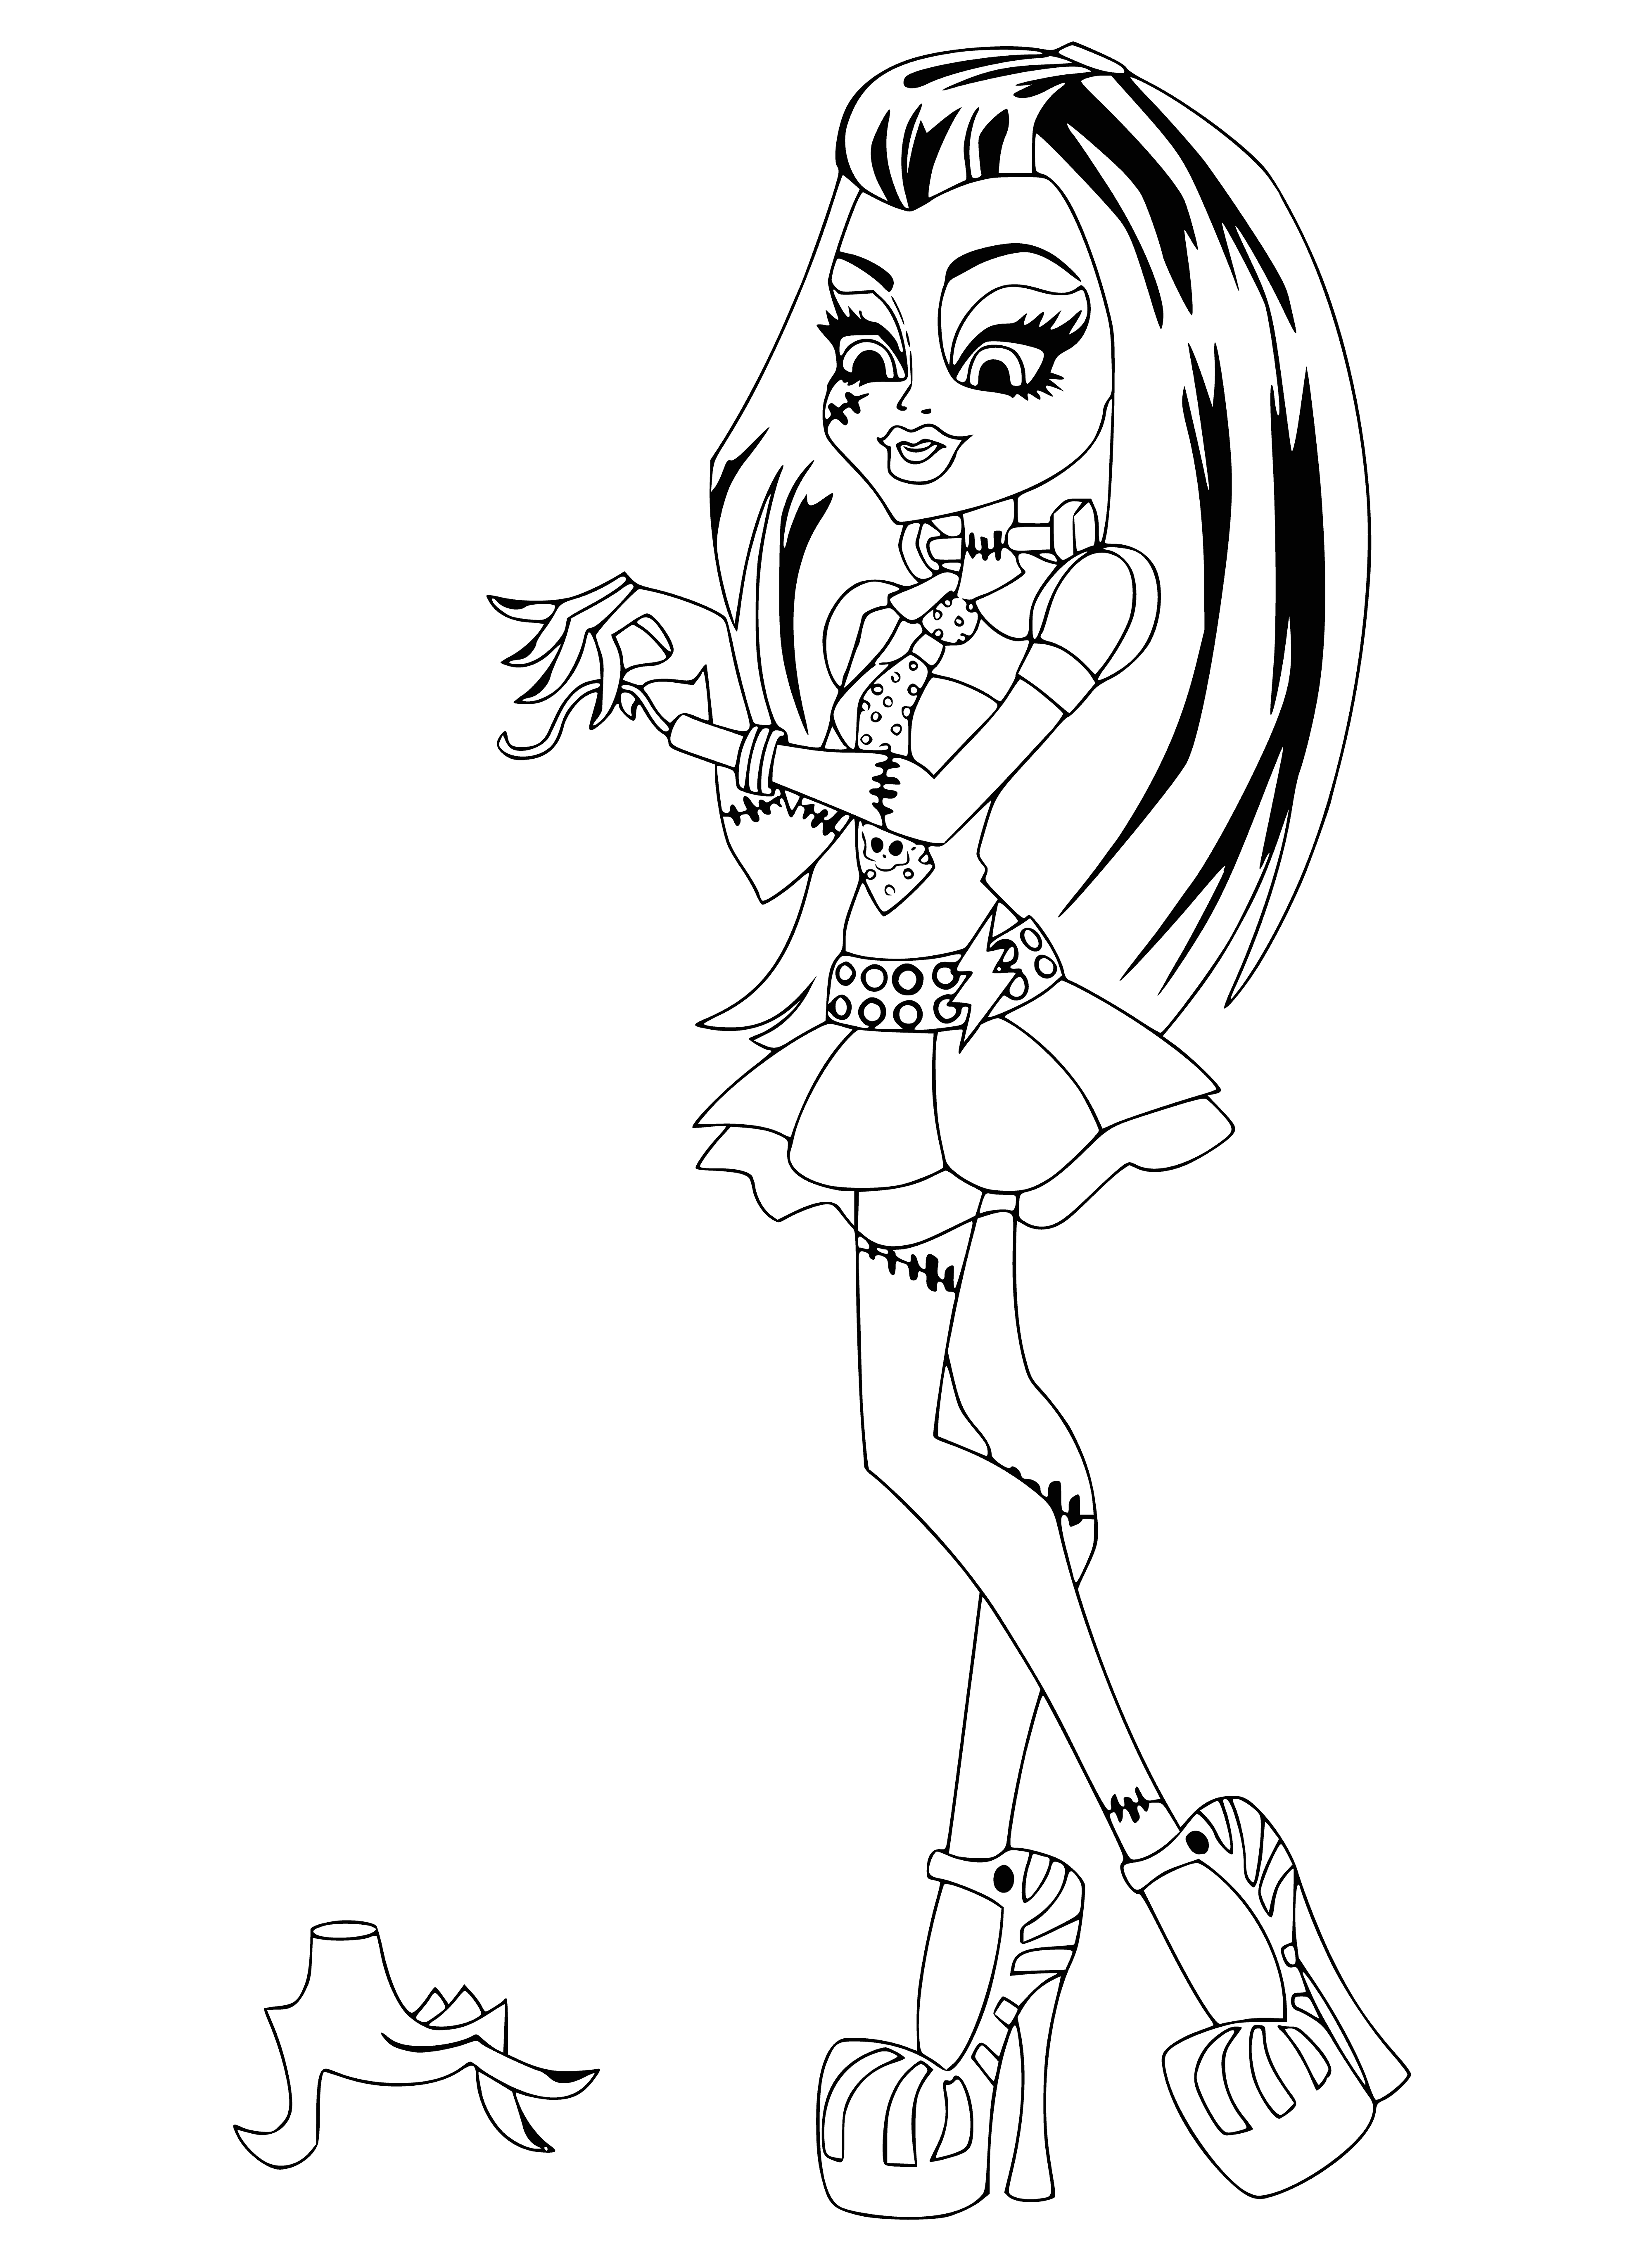 Frankie Stein without arms coloring page